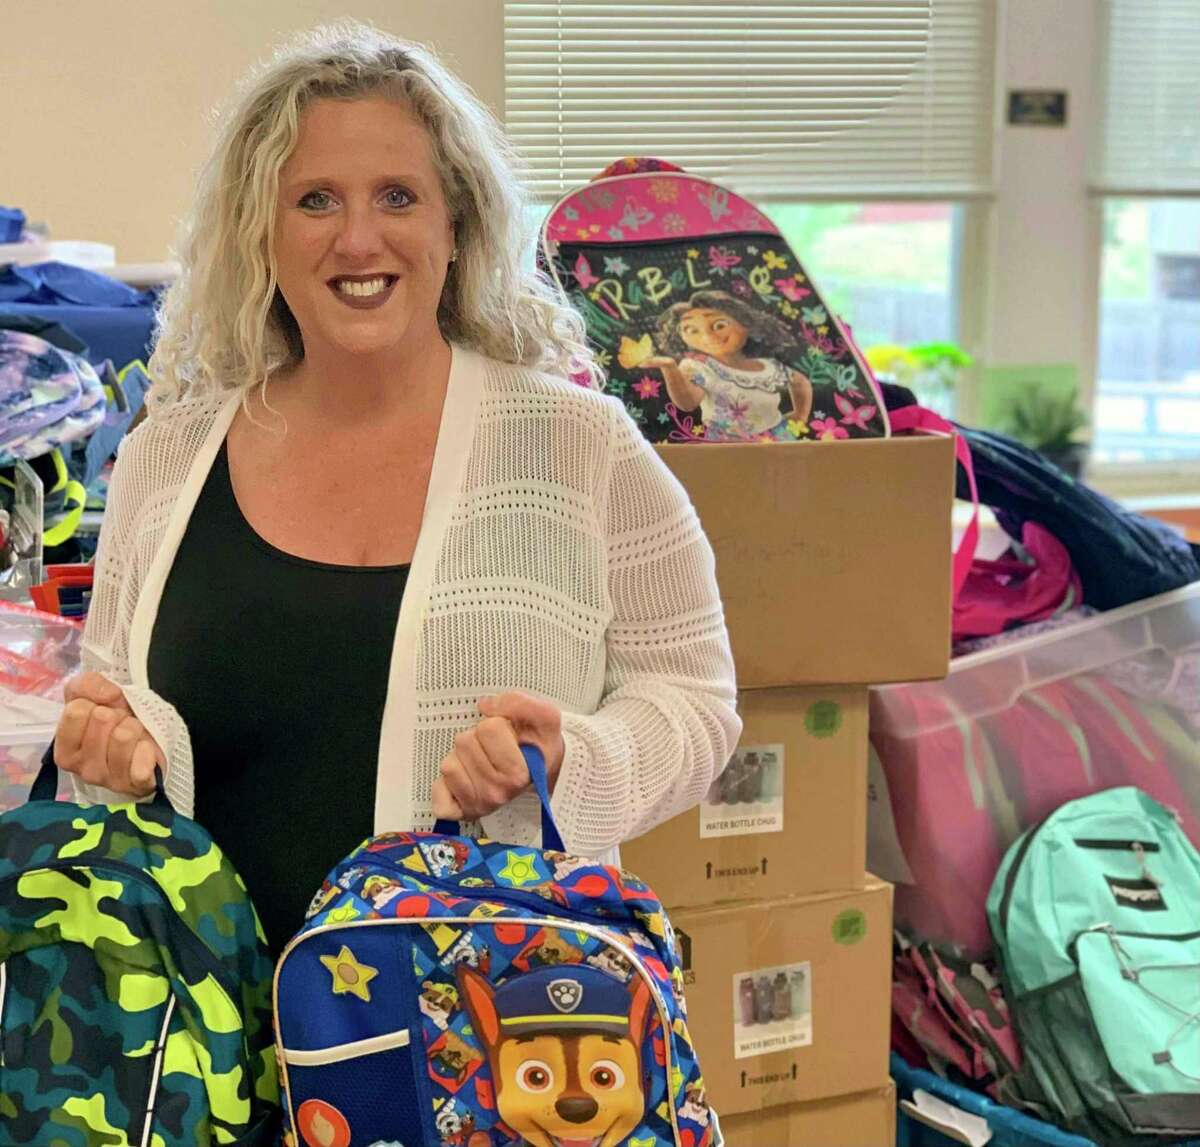 CDR program and outreach coordinator Andrea Savino with some of the 89 backpacks distributed at the Aug. 23 CDR Community Dinner at Branford’s Community House